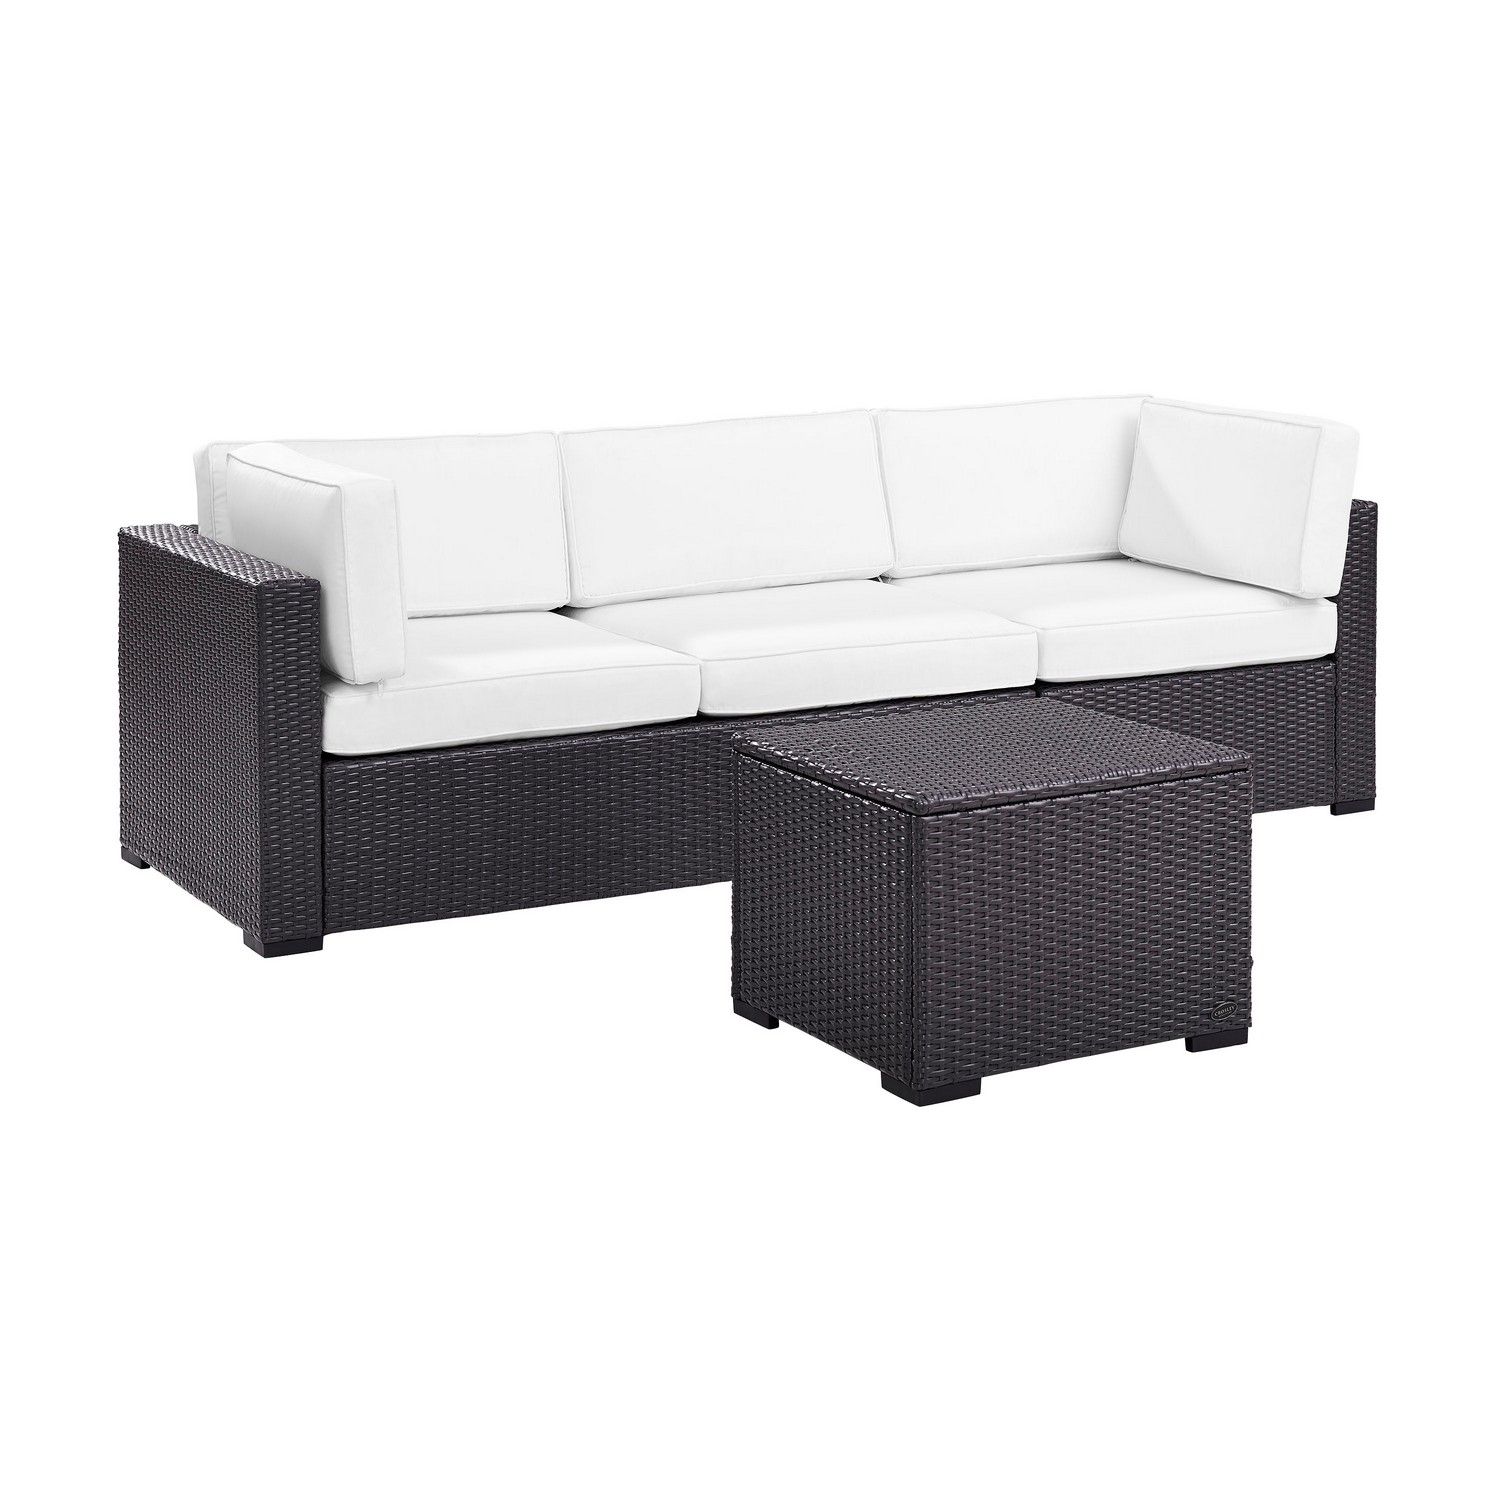 Crosley Biscayne 3-PC Outdoor Wicker Sectional Set - Loveseat, Corner Chair, Coffee Table - White/Brown